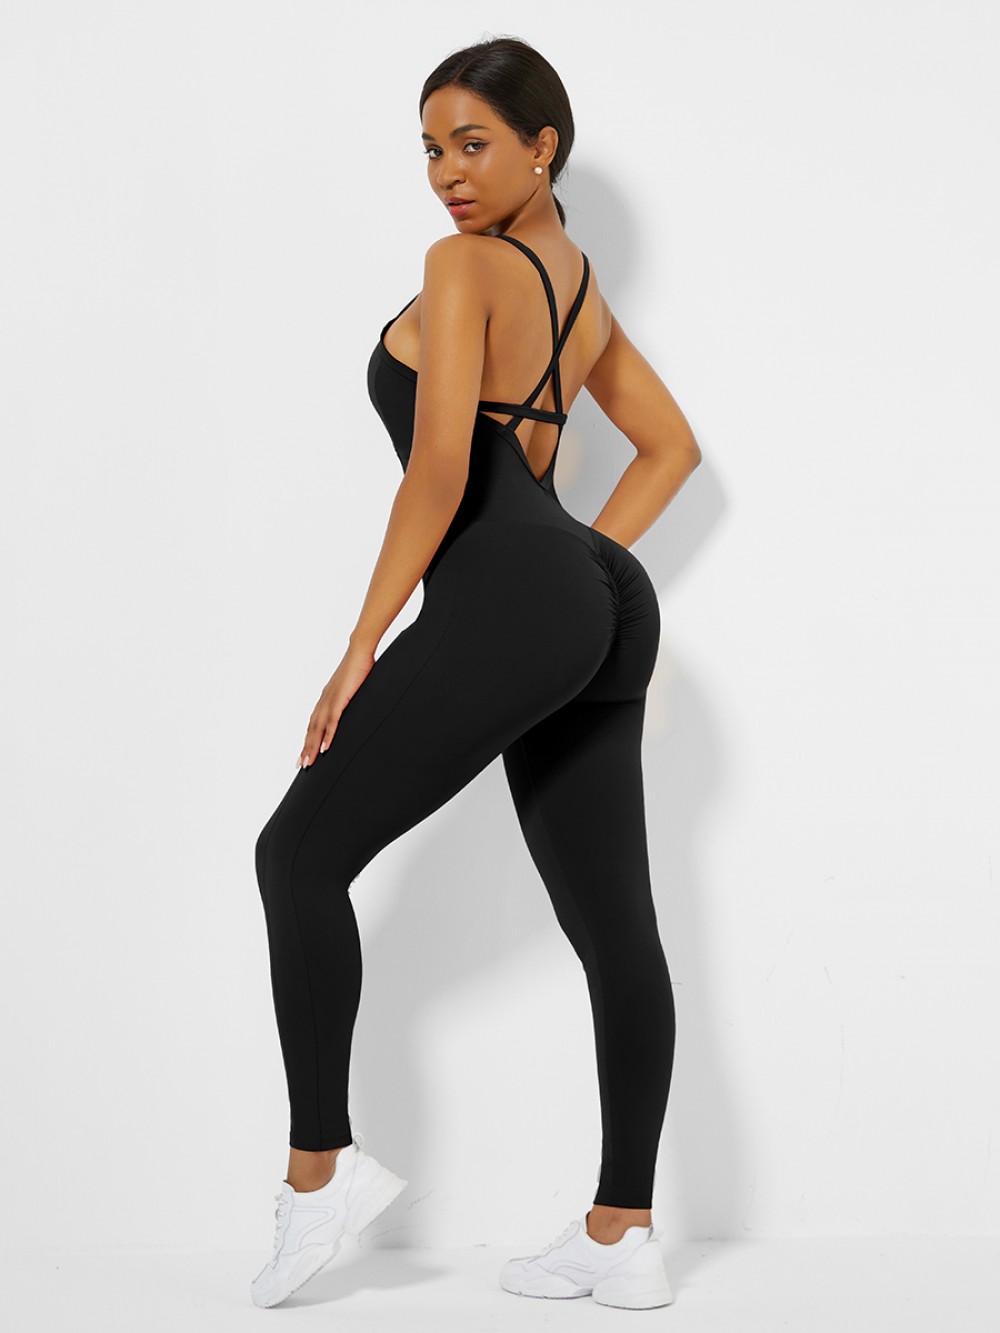 Black Strappy Back Removable Pads Yoga Bodysuit Quick Drying